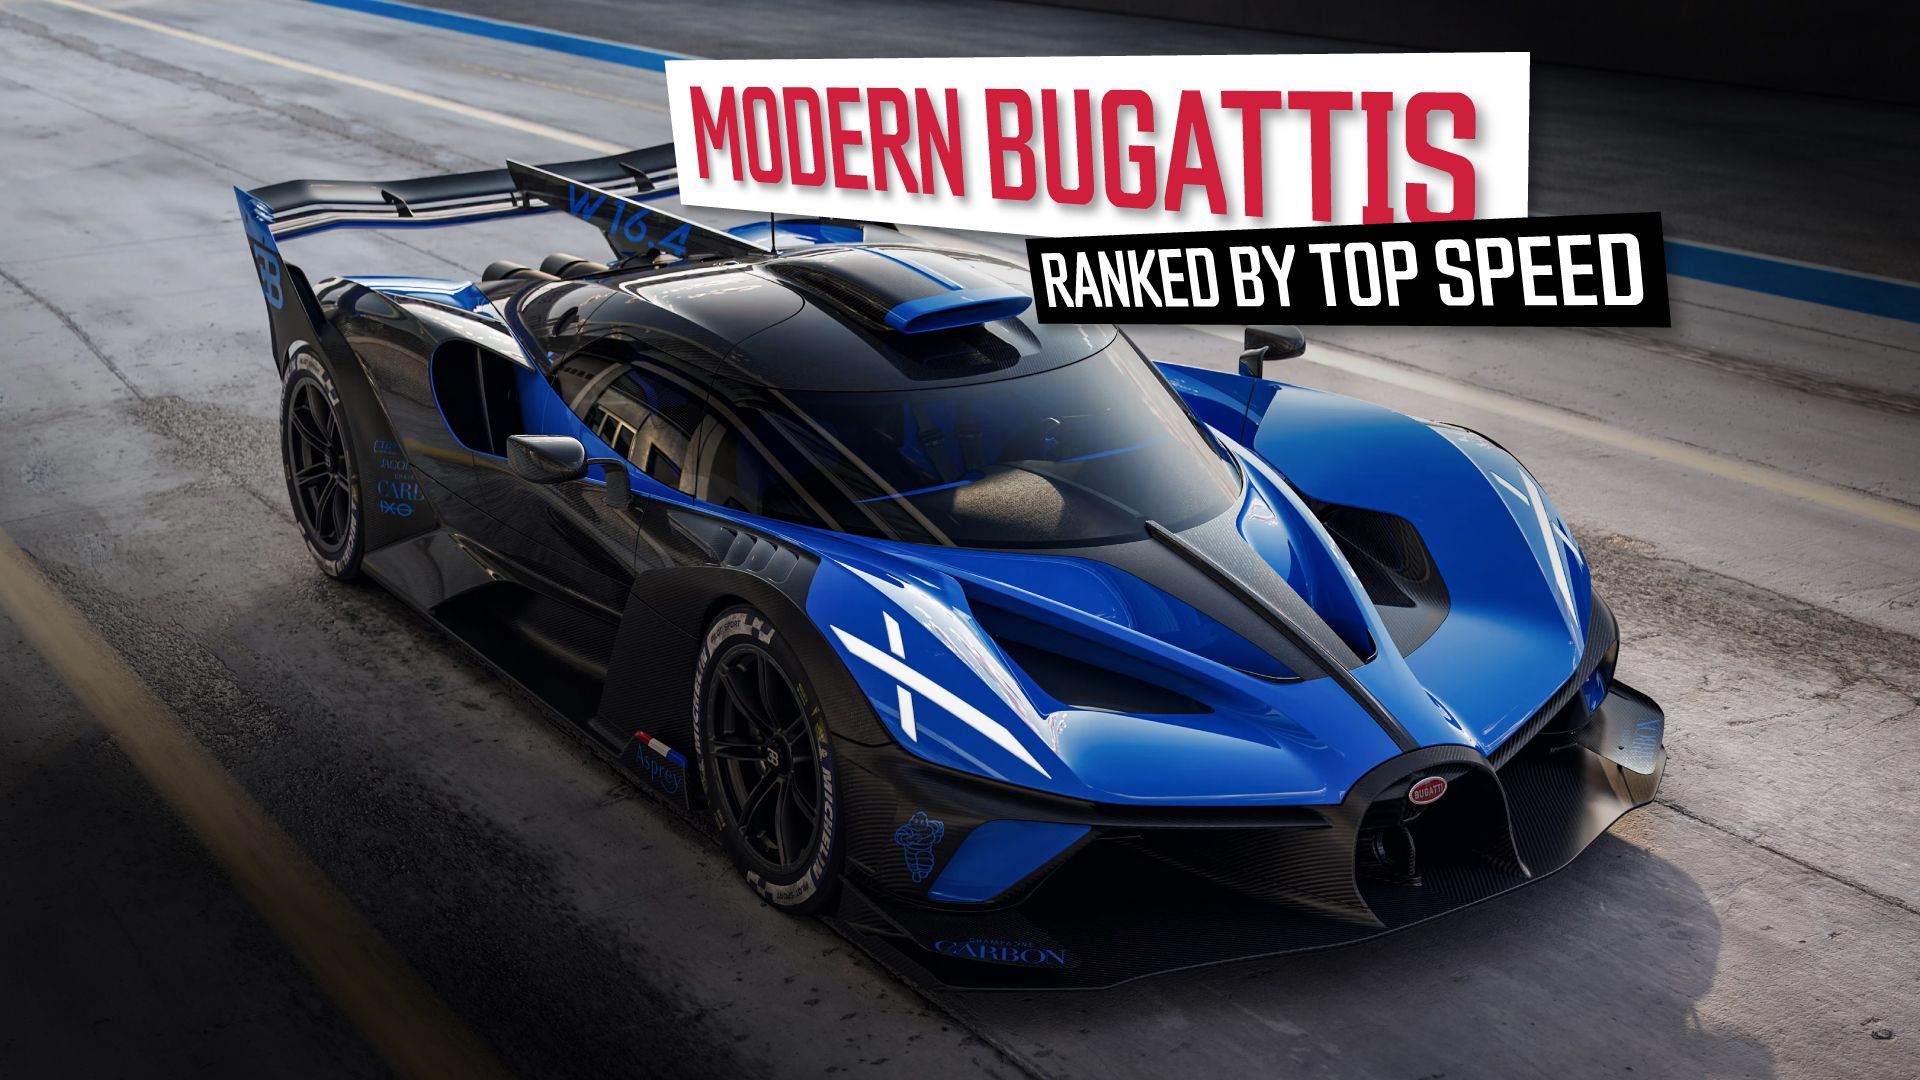 Bugatti’s-Modern-Creations-Ranked-By-Top-Speed